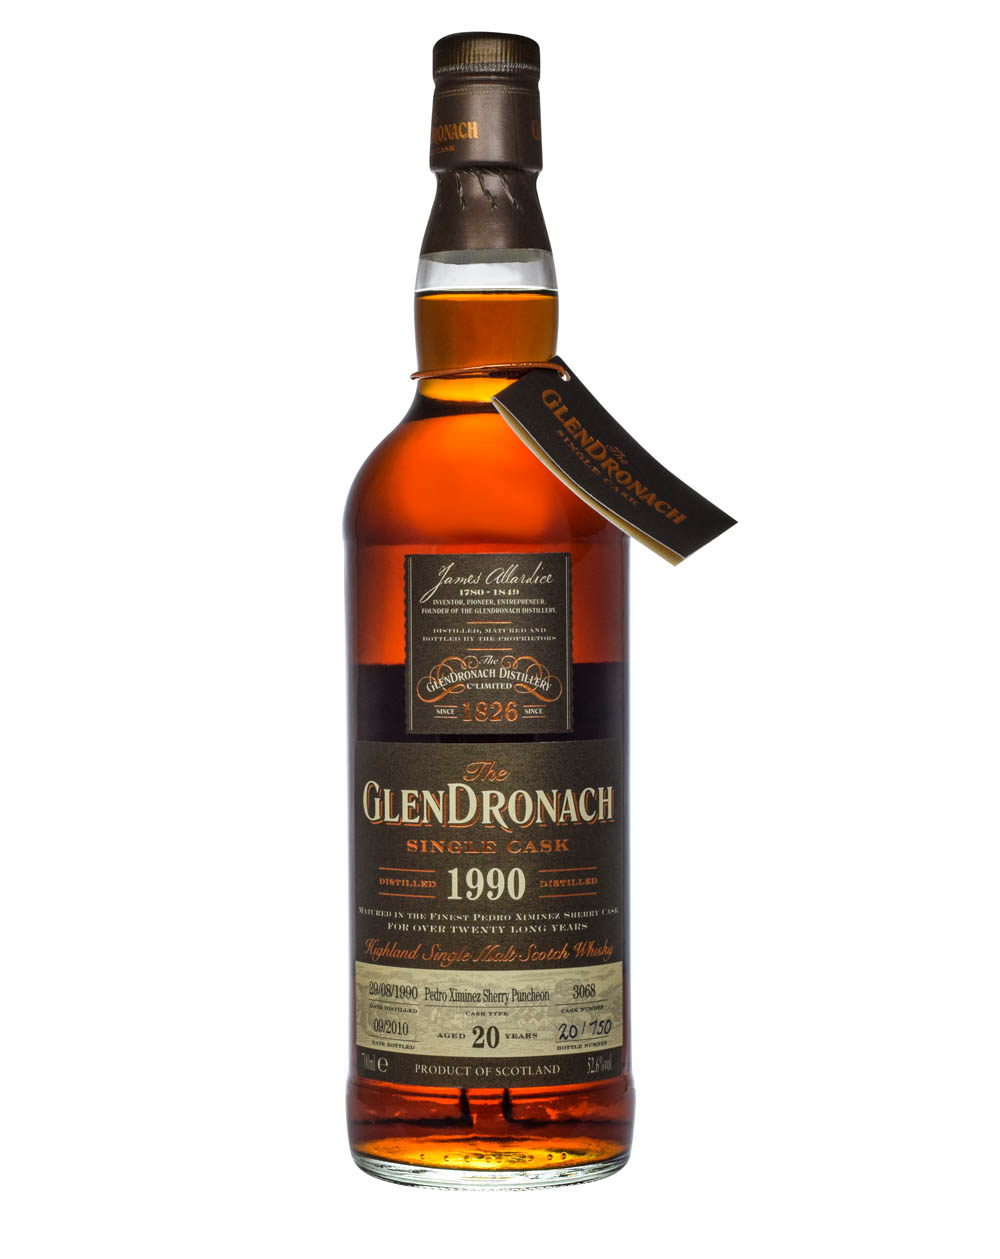 Glendronach 20 Years Old Single Cask 1990 Musthave Malts MHM